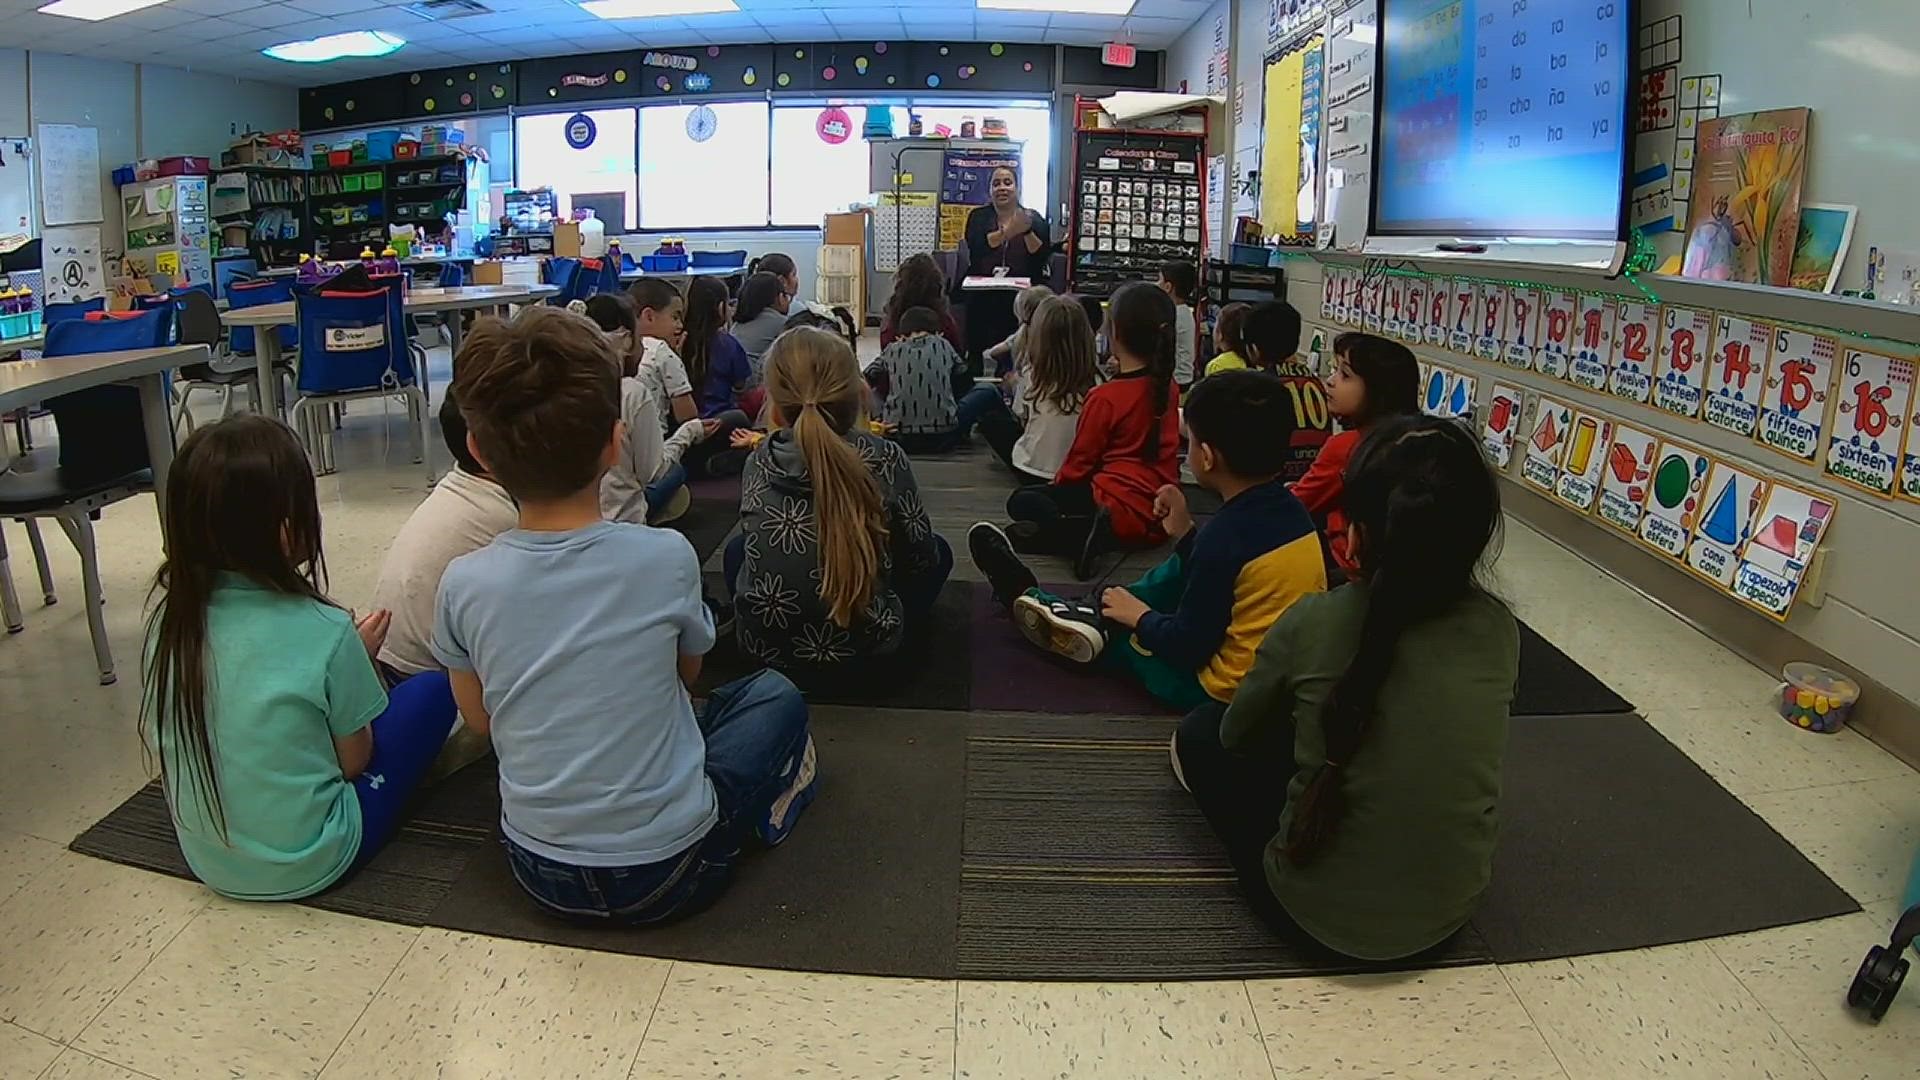 The bilingual schooling program in Muscatine is looking to match the success that other bilingual school programs across the country have found.